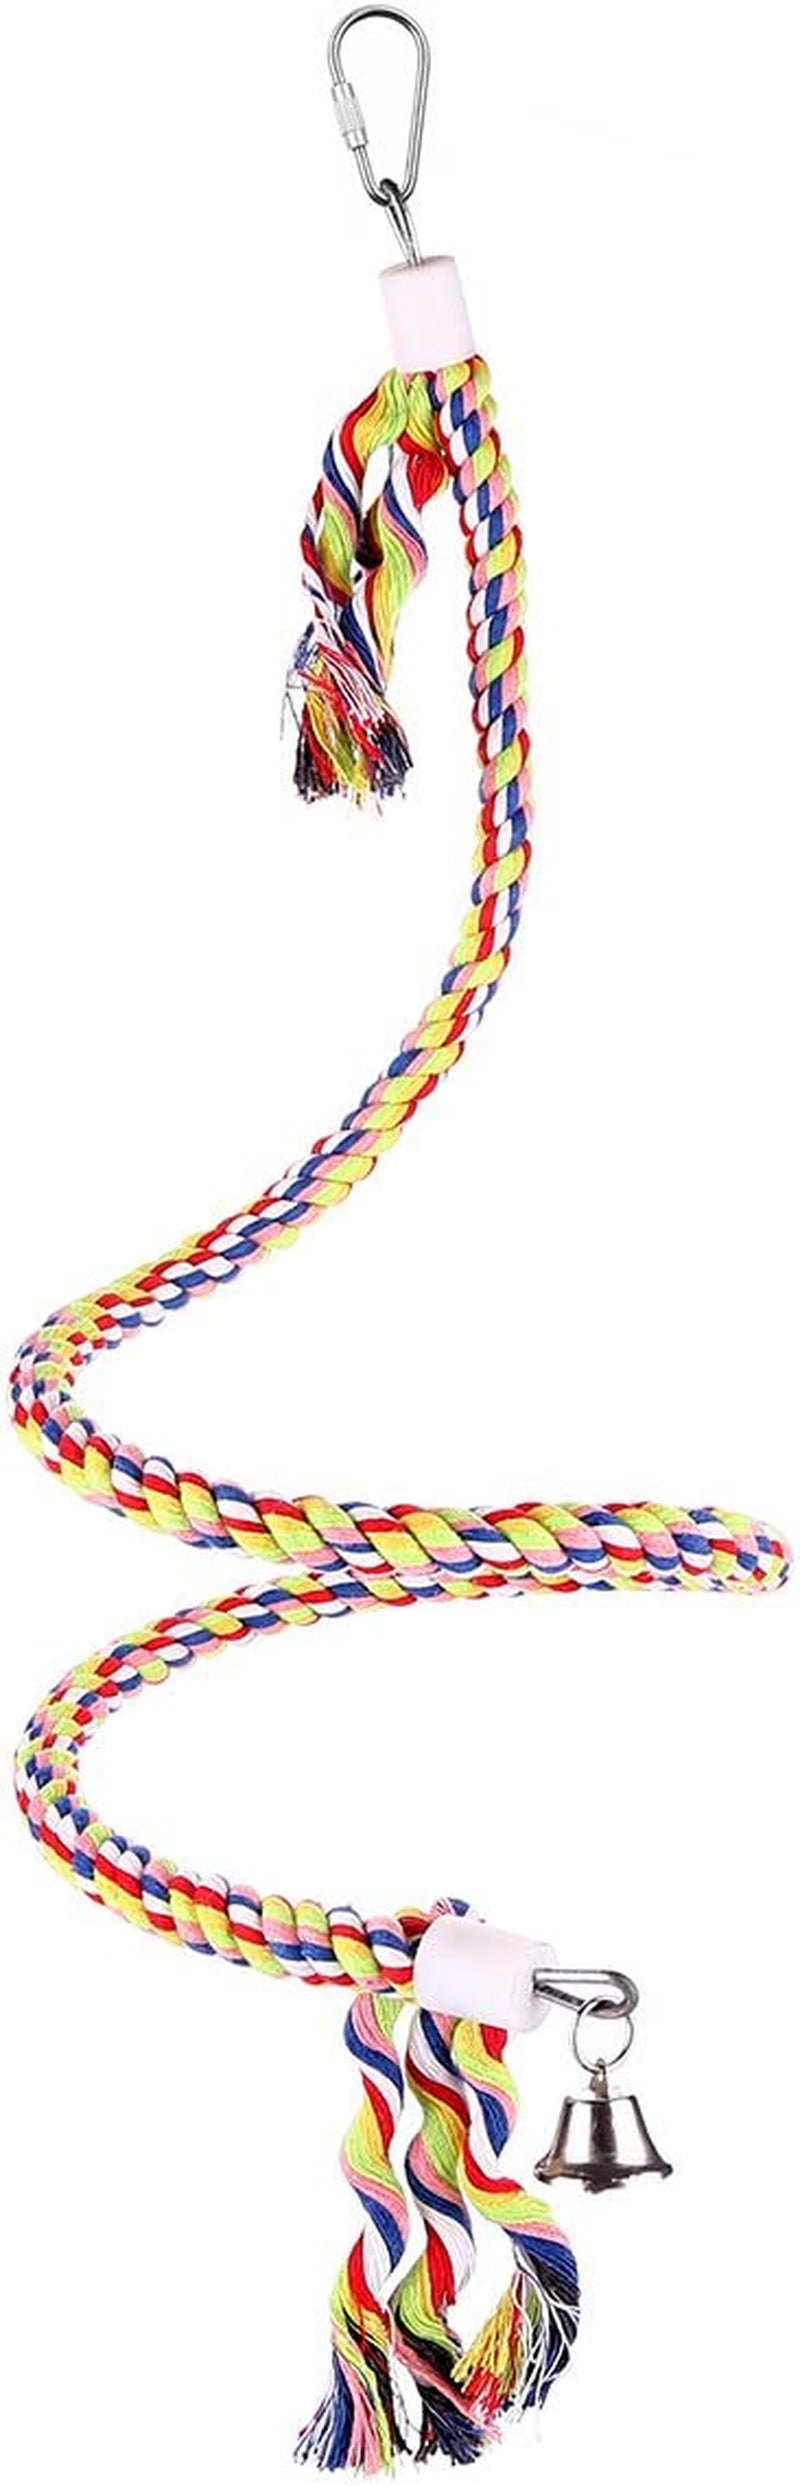 Bvanki Bird Rope Toys,49 Inch Long Parrot Bungees Rope Toys, Large Medium and Small Parrot Toys Spiral Standing Toys (Medium 49 Inch)